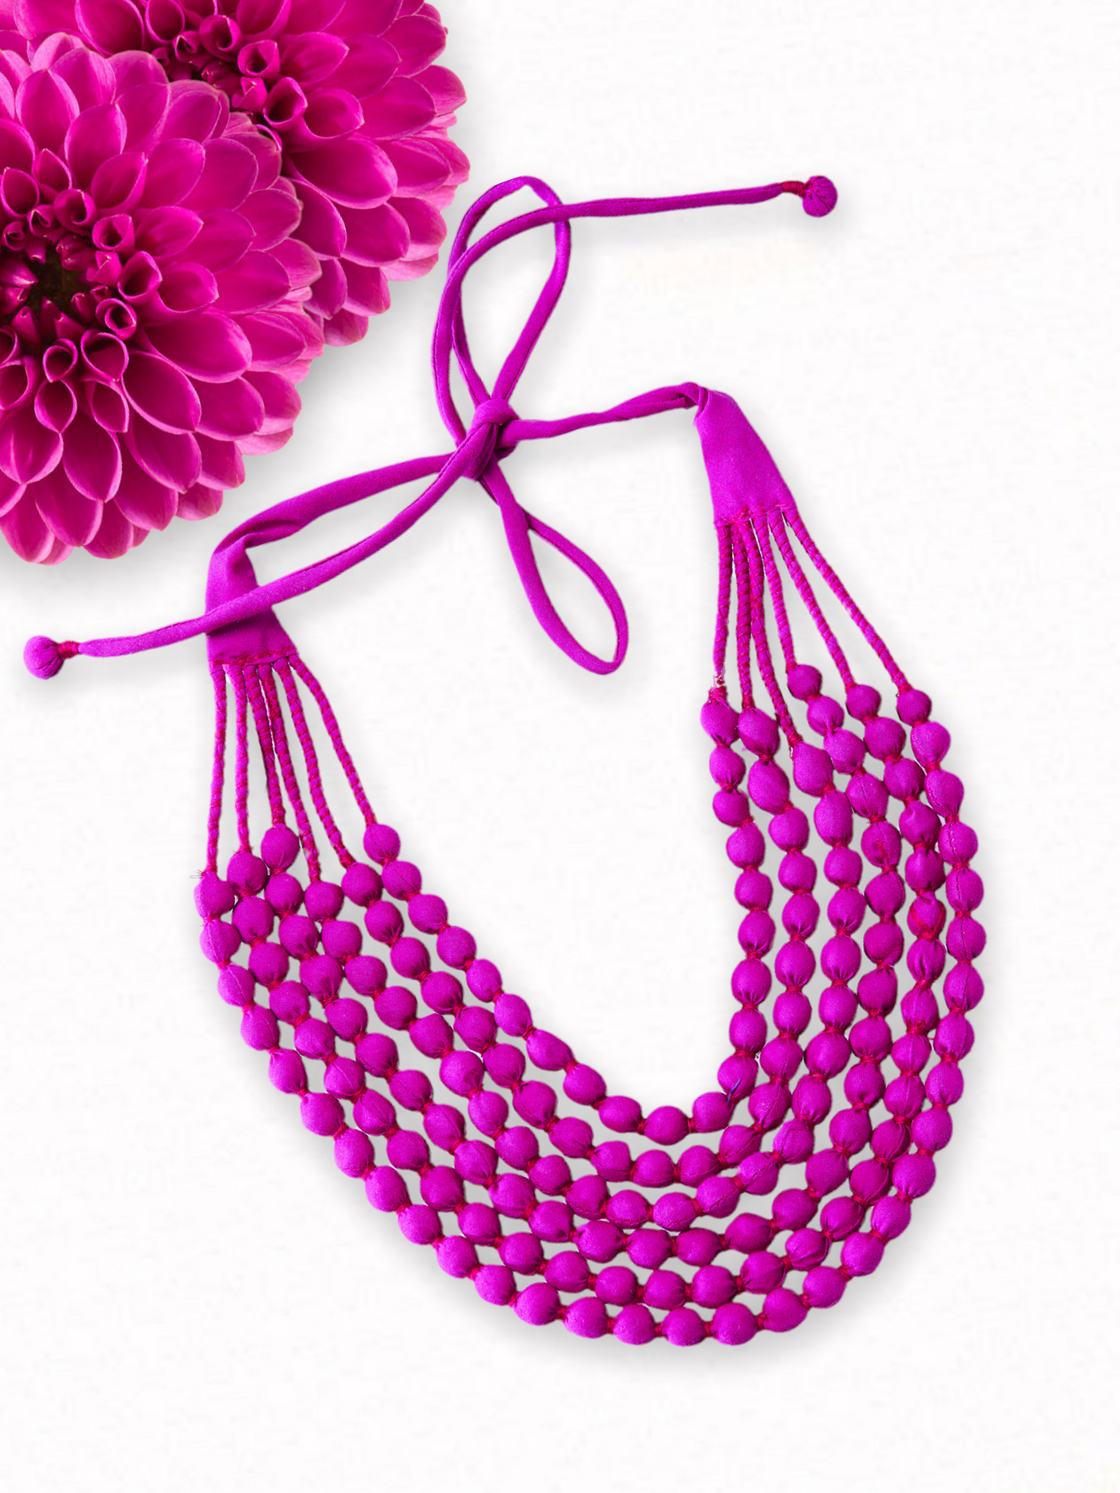 Fabric beads necklace